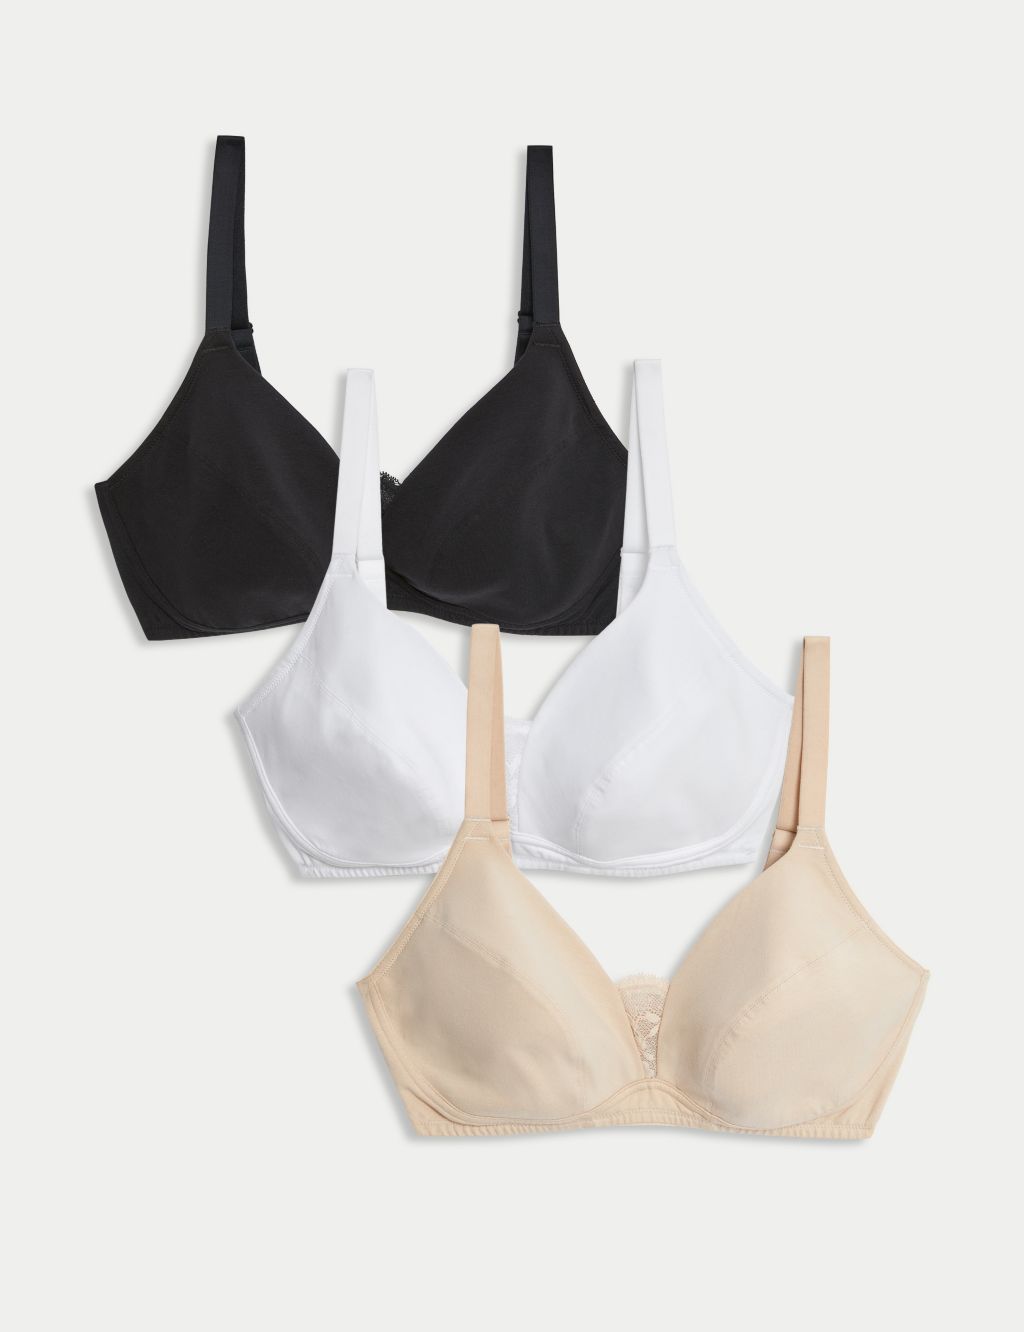 Product Name: *Comfy Cotton Bra (Pack Of 2)